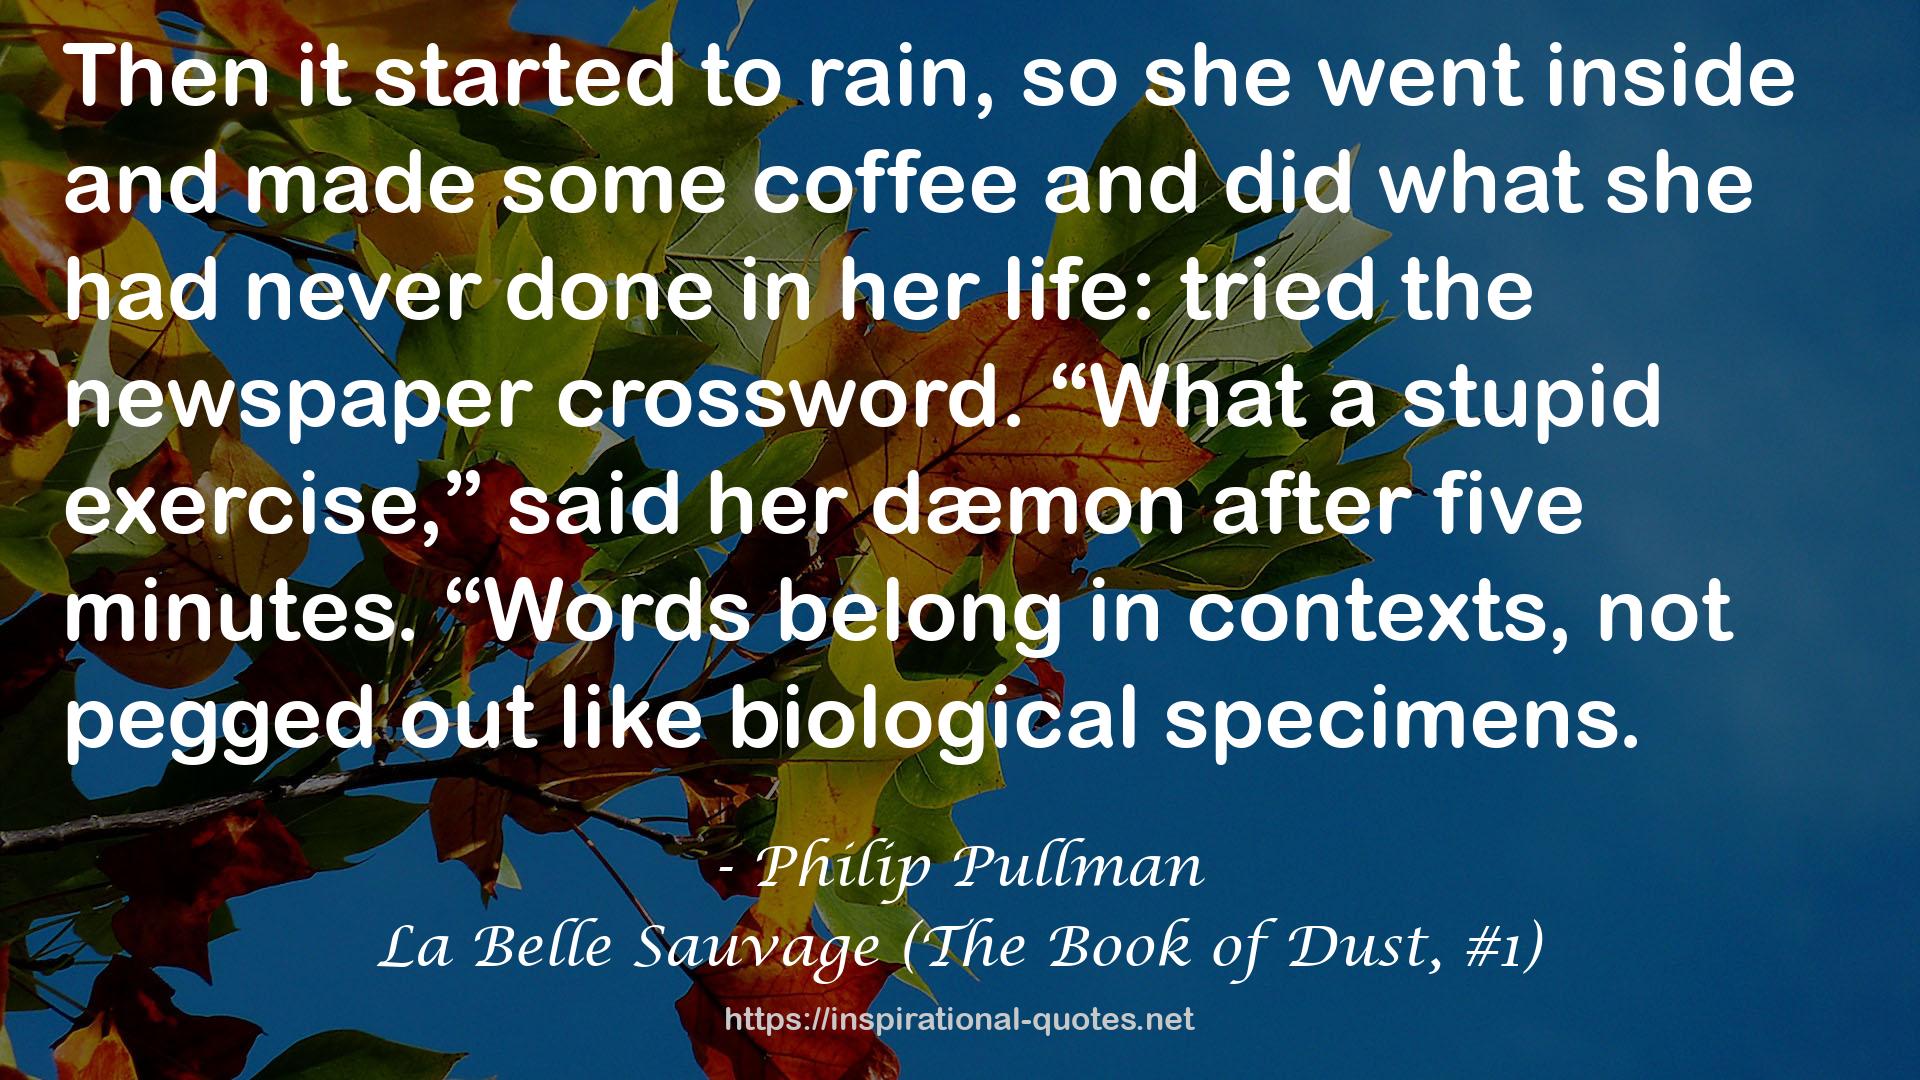 La Belle Sauvage (The Book of Dust, #1) QUOTES